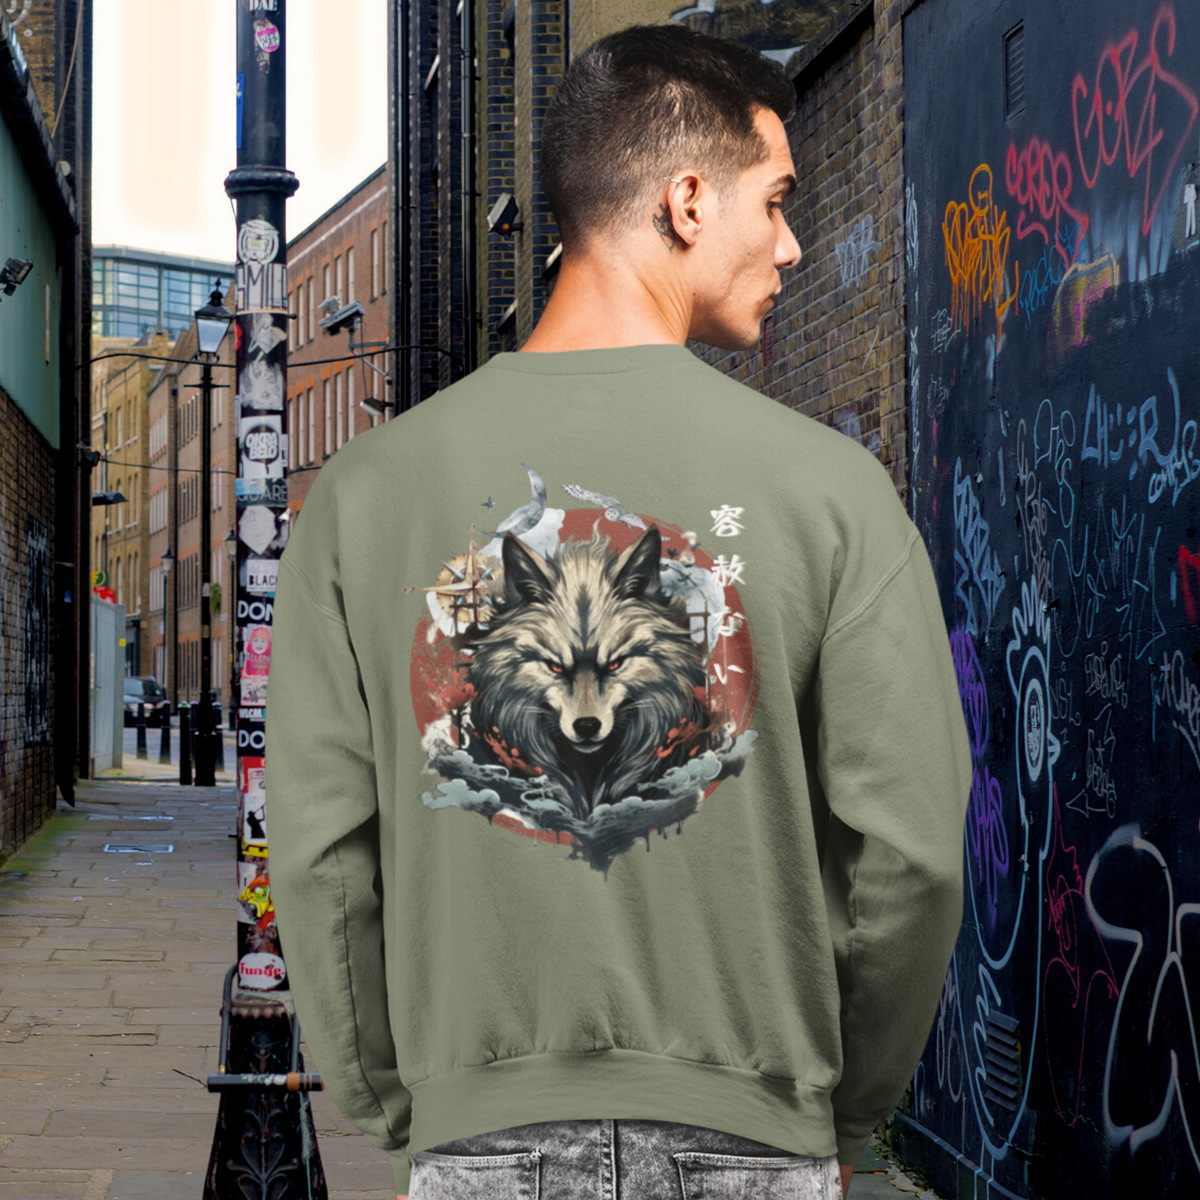 Japanese Wolf Sweatshirt, Cultural Artistry, Folklore Design, Nature and Myth, Compass Theme, Symbolic Apparel, Adventure Wear, Ancient Symbolism, Navigational Art, Mythical Creatures, Tradition and Style, Artistic Sweatshirt, Storytelling Fashion, Heritage Fusion, Wolf Spirit, Contemporary Symbolism, Exploration Vibes, Cultural Fusion, Intricate Prints, Statement Outerwear